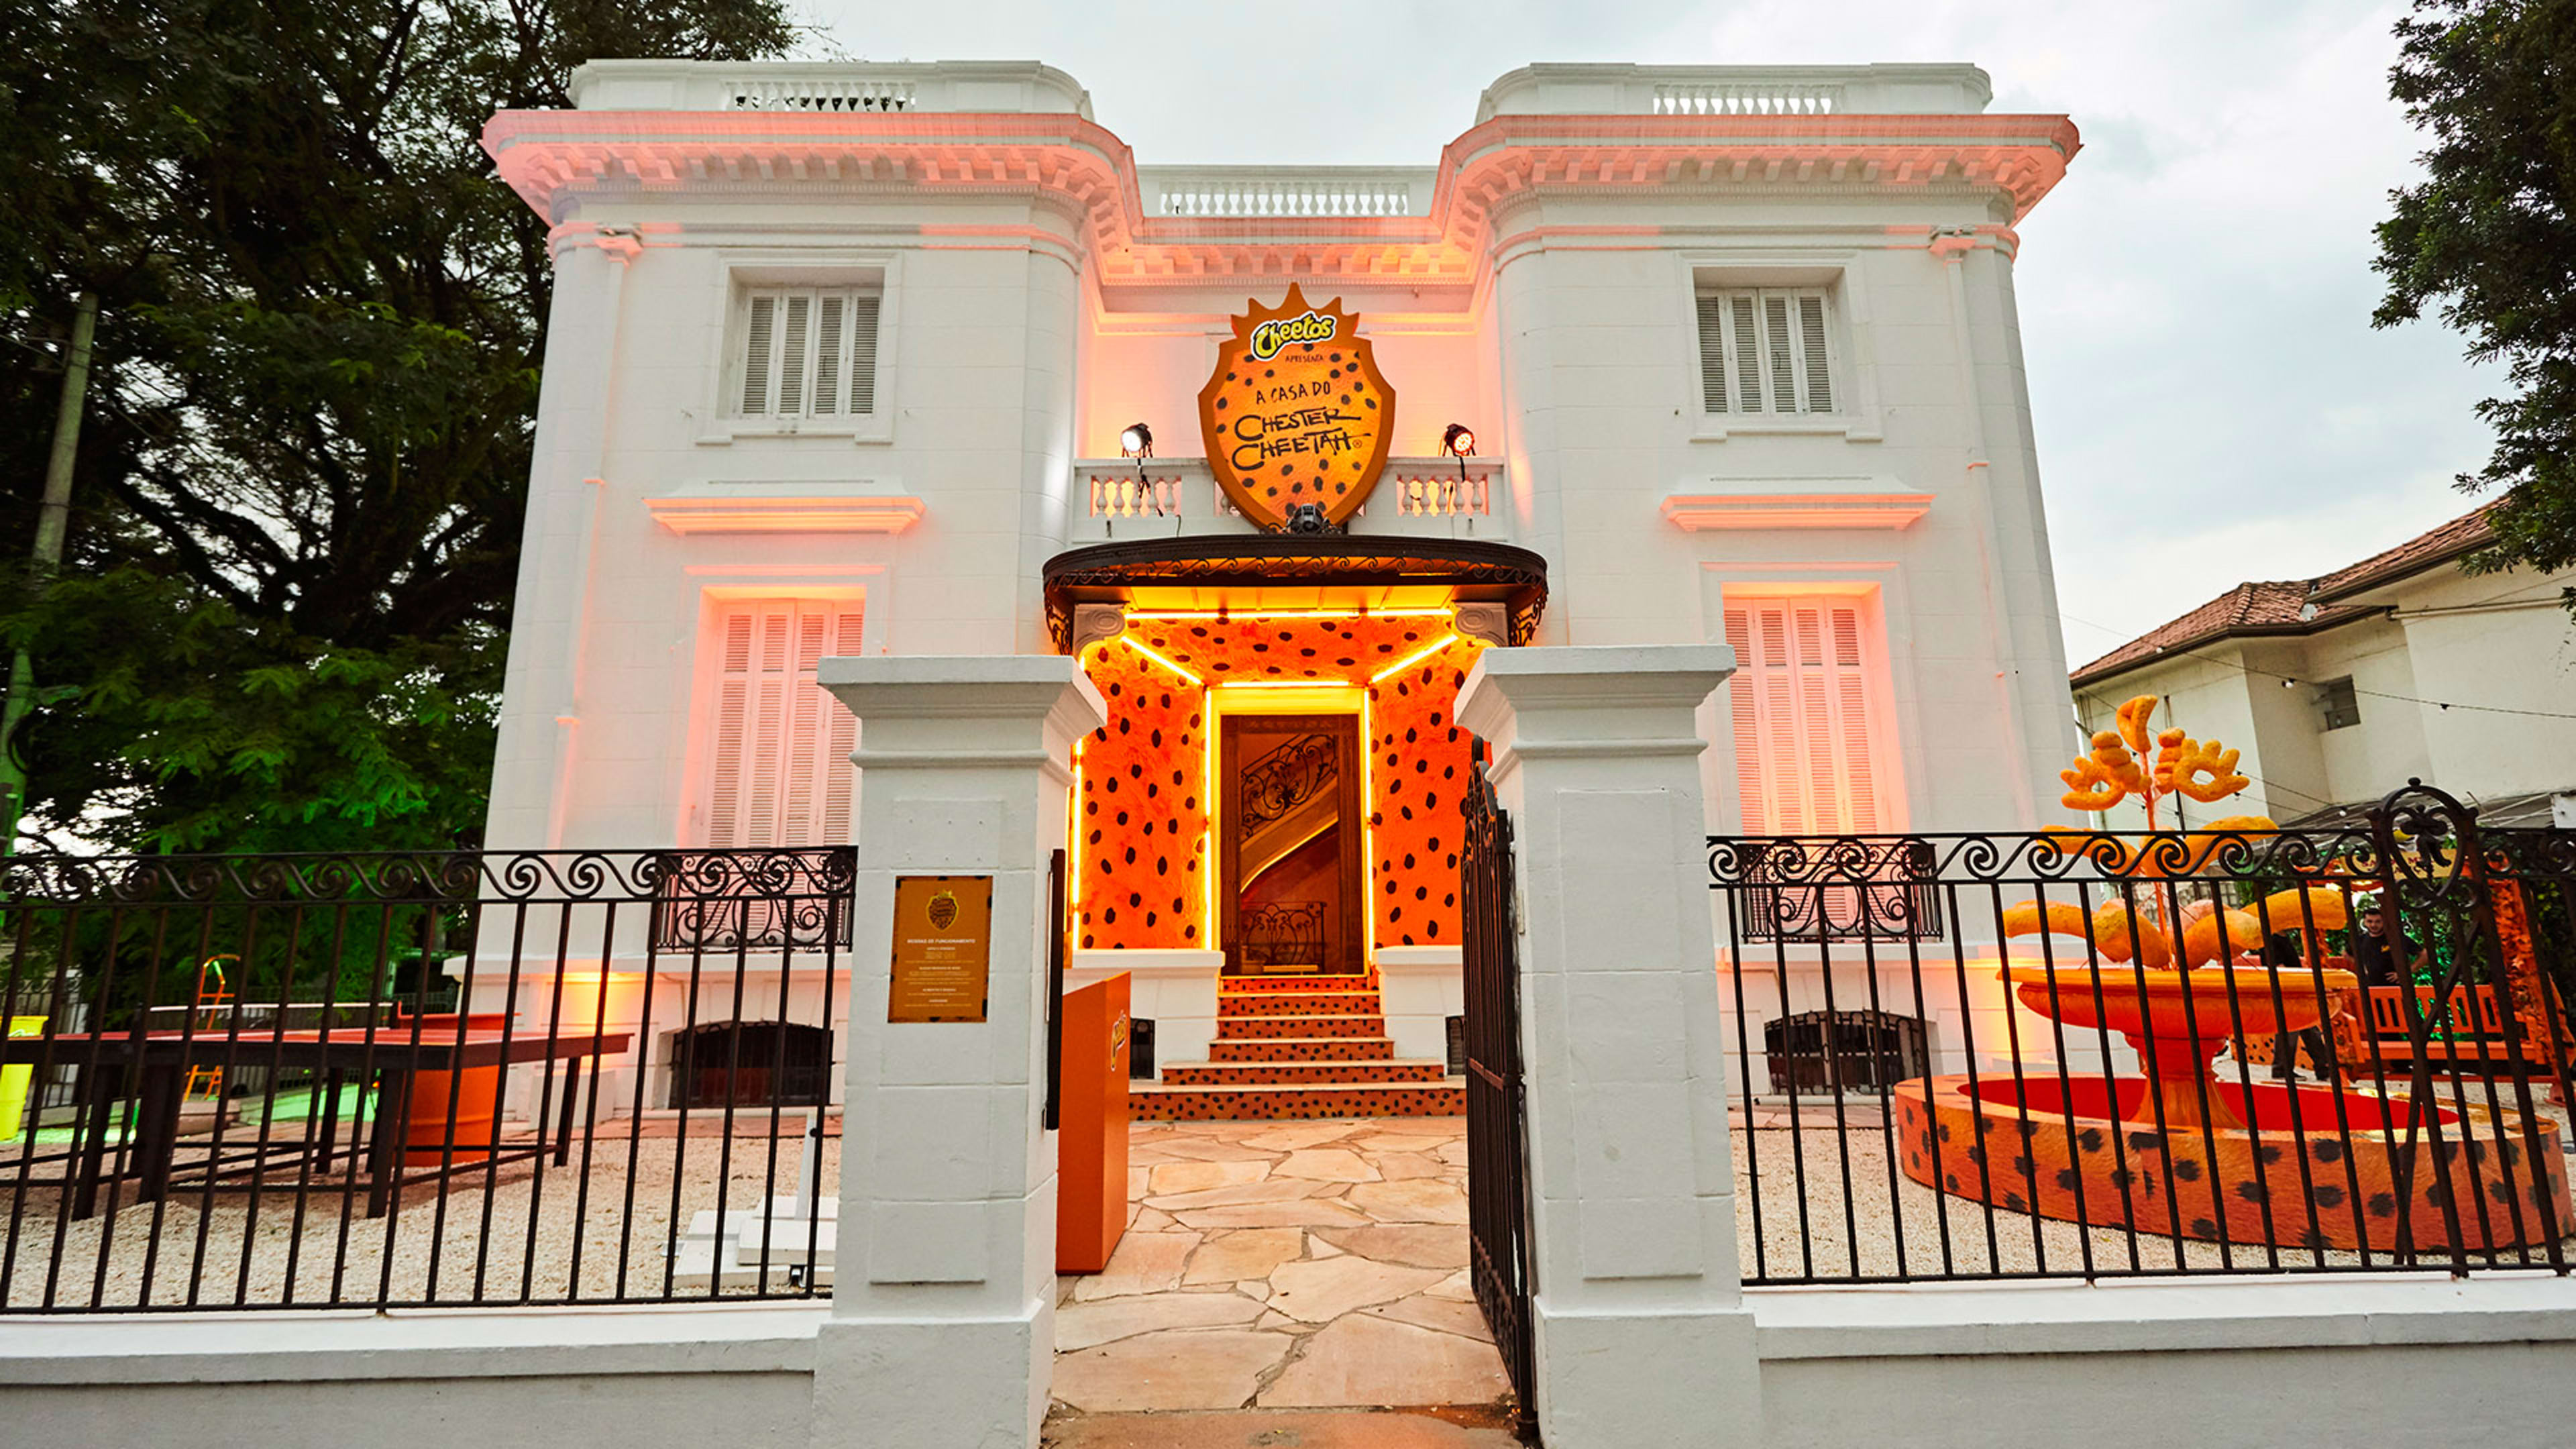 You have to see this Cheetos-themed mansion, a real thing that actually exists